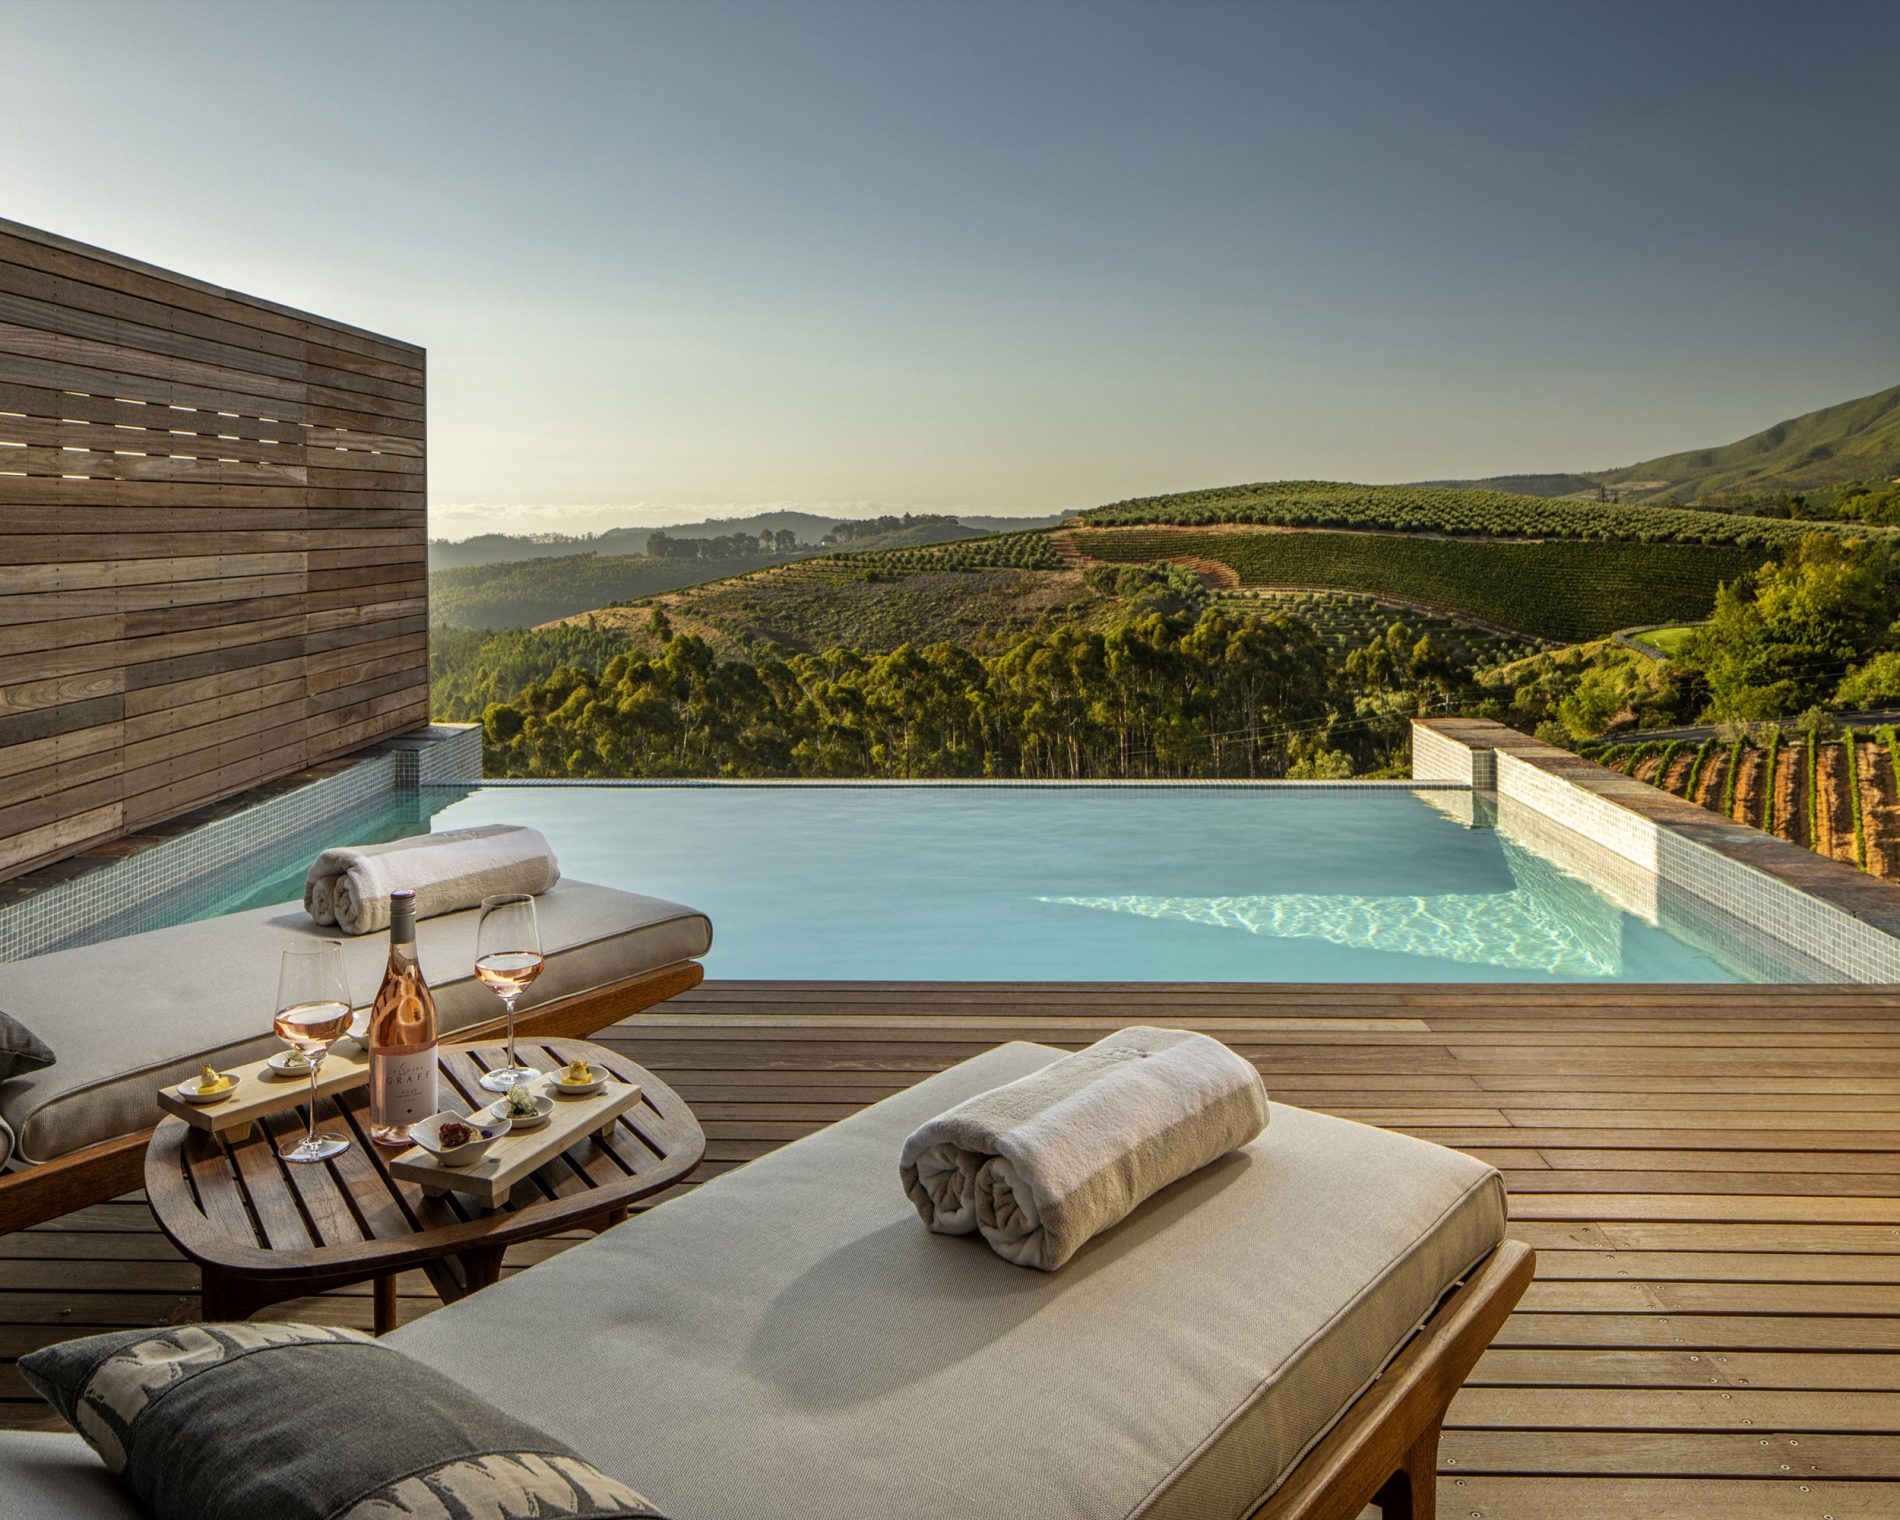 A Superior Lodge private terrace and heated plunge pool overlooking the Stellenbosch valley